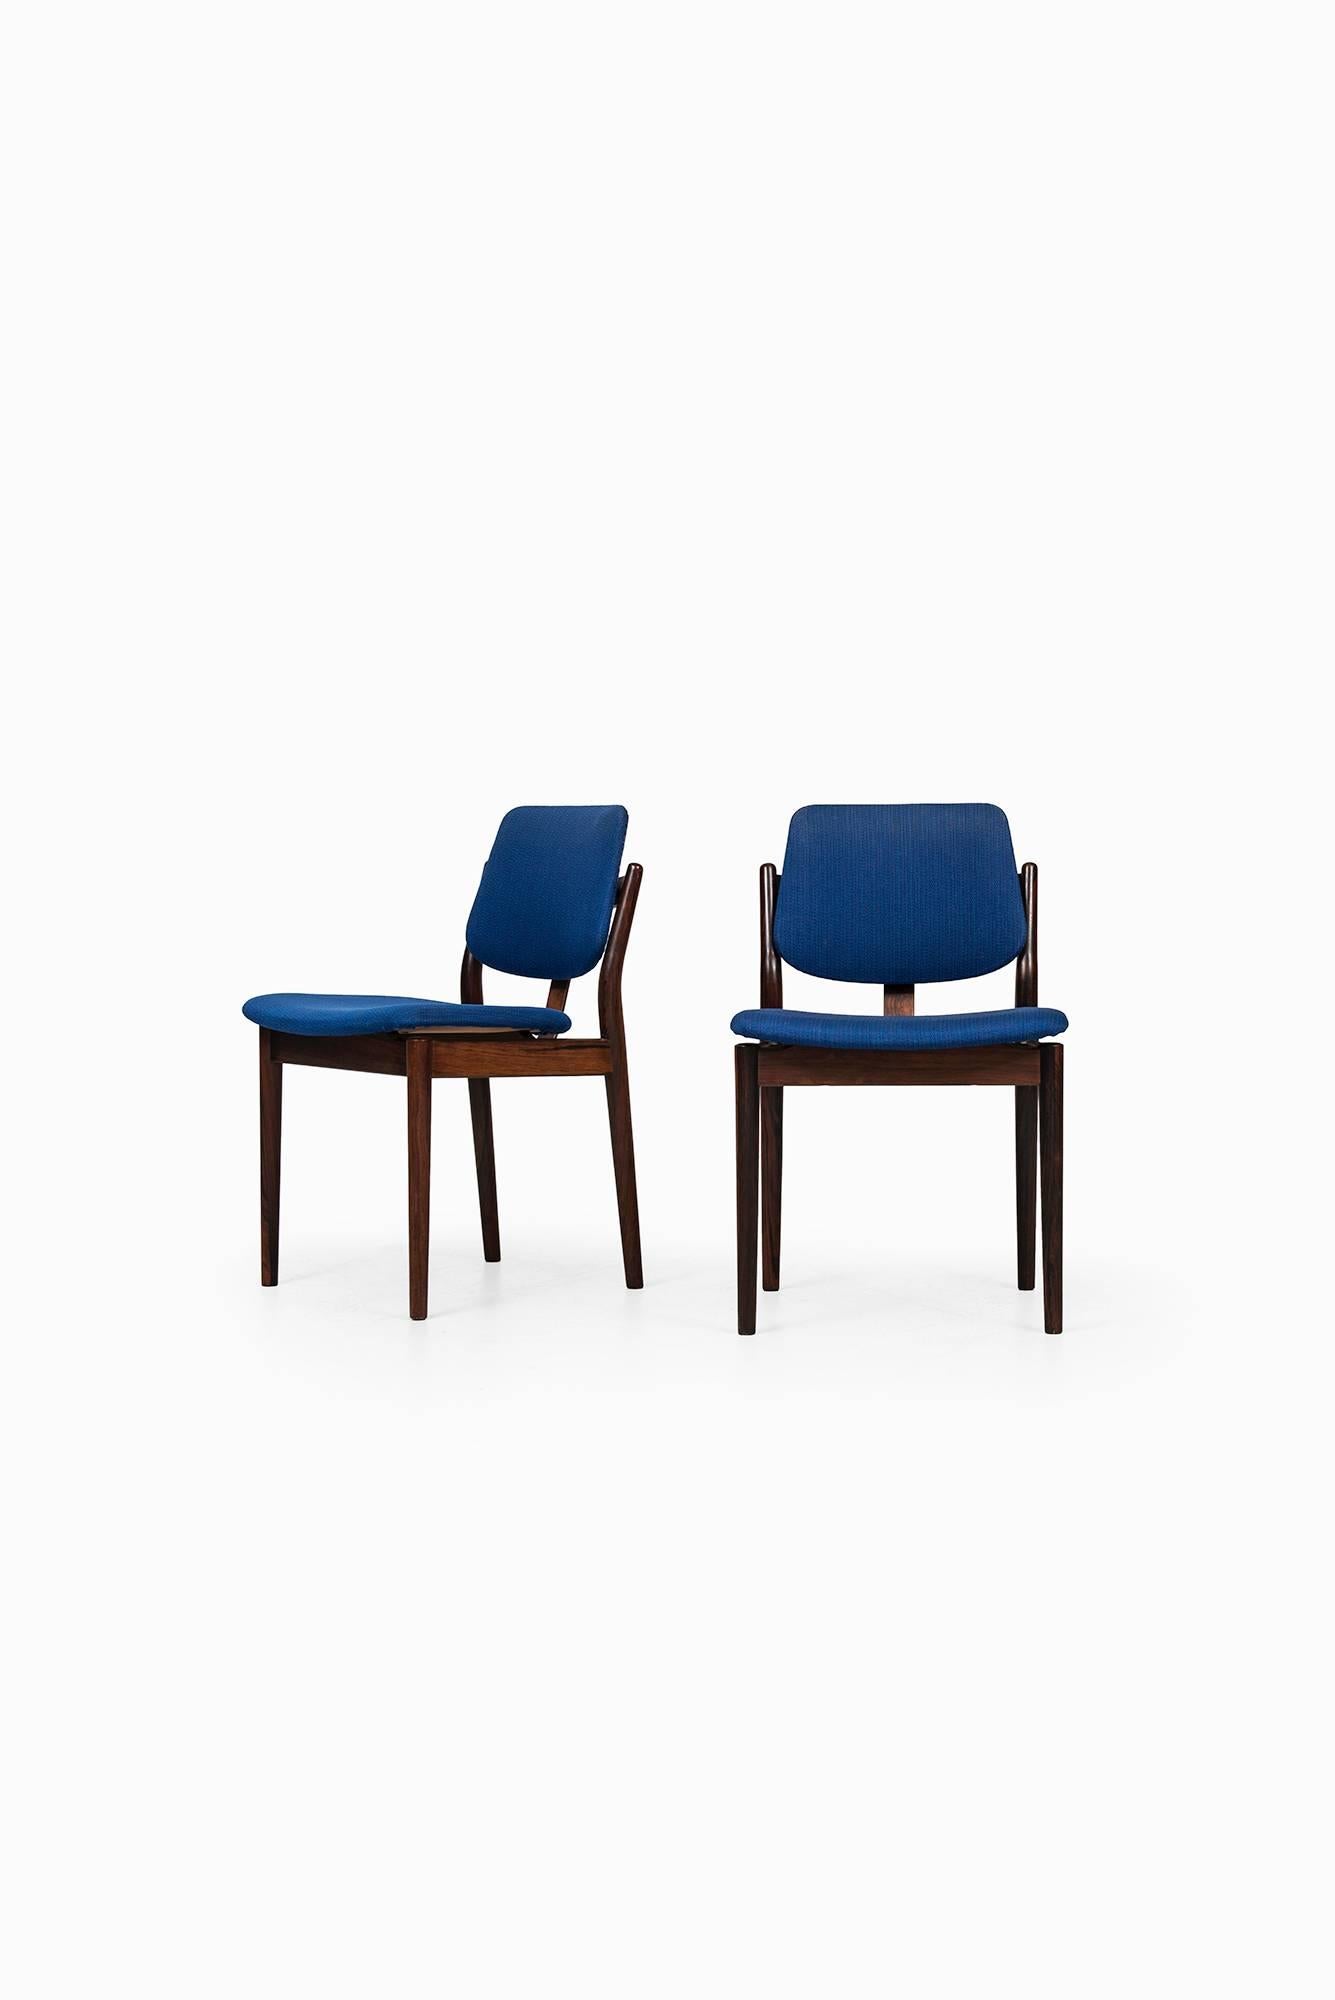 Rare set of eight dining chairs designed by Arne Vodder. Produced by Sibast Møbelfabrik in Denmark.